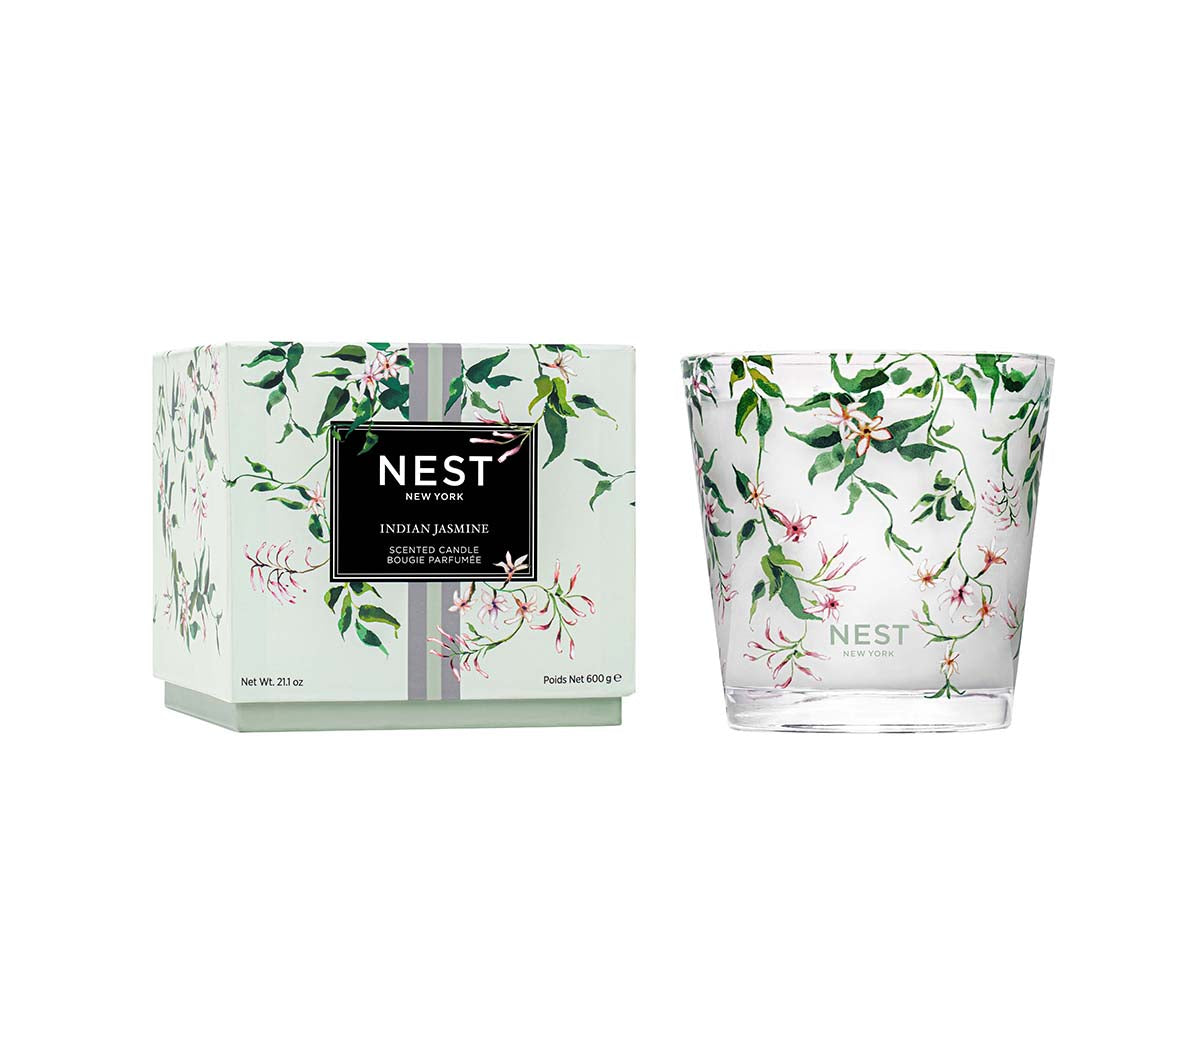 Indian Jasmine Specialty 3-Wick Candle 21.2 oz by Nest New York